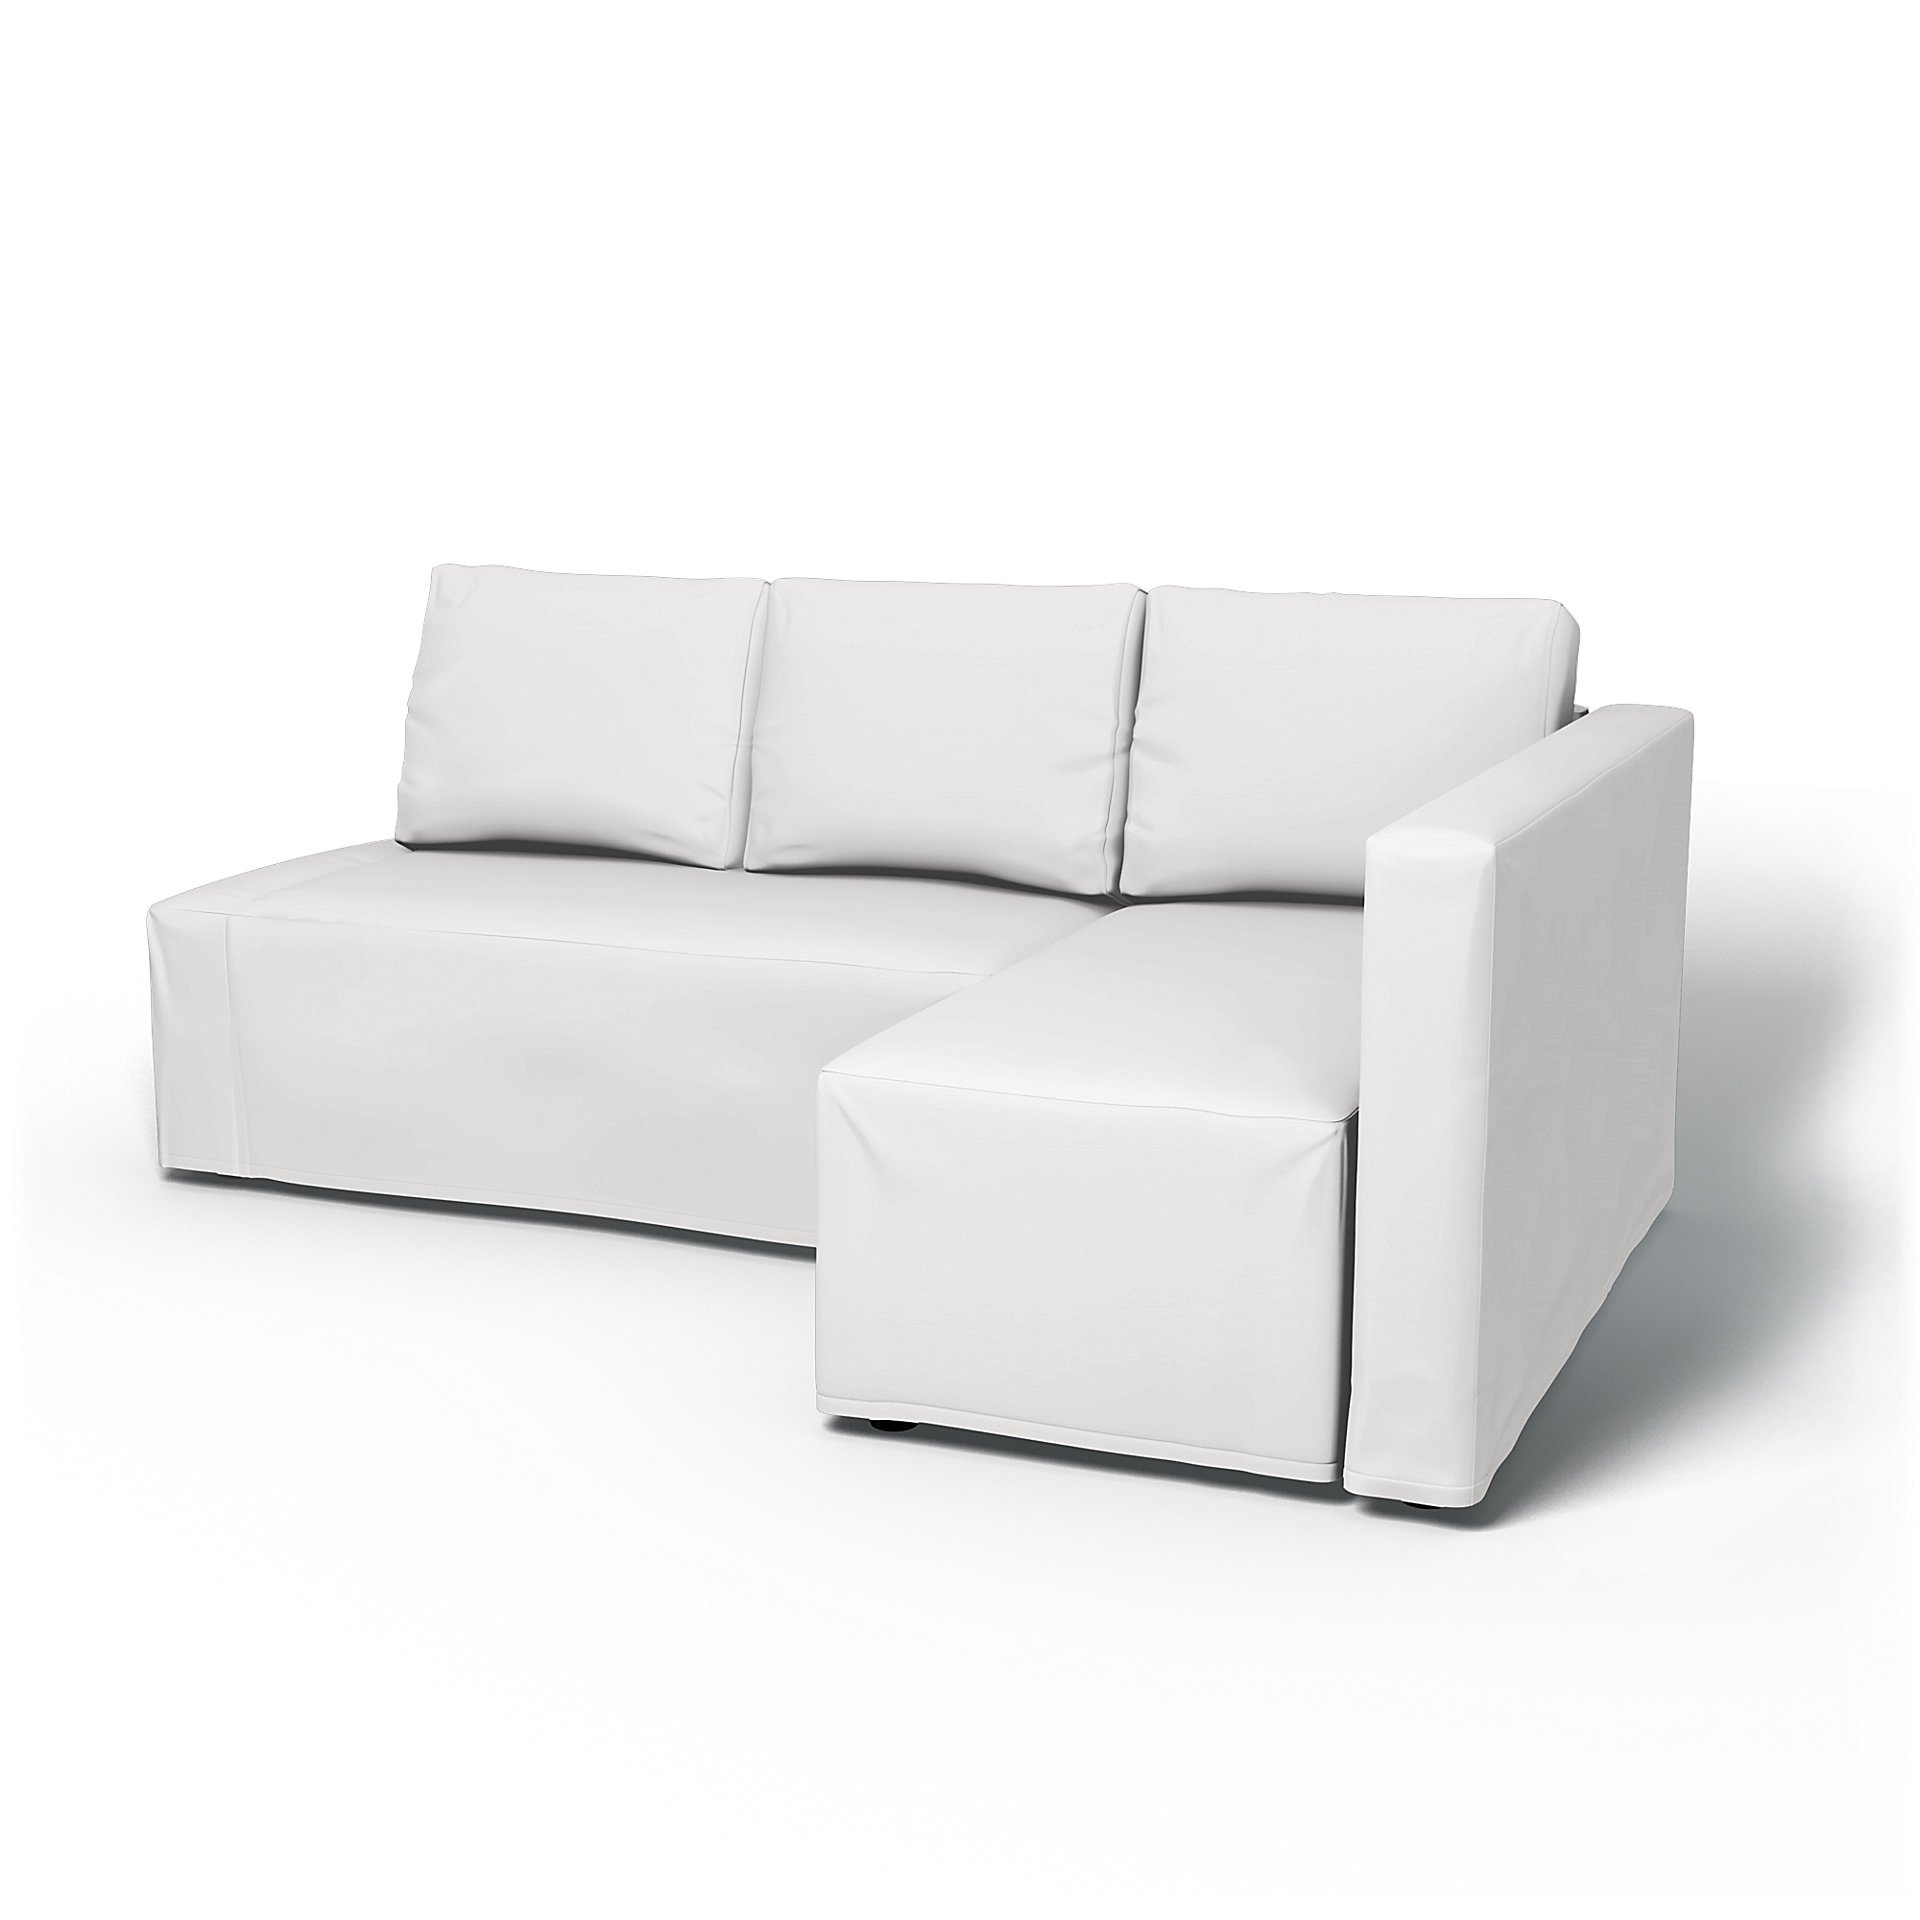 IKEA - Friheten Sofa Bed with Right Chaise Cover, Absolute White, Cotton - Bemz